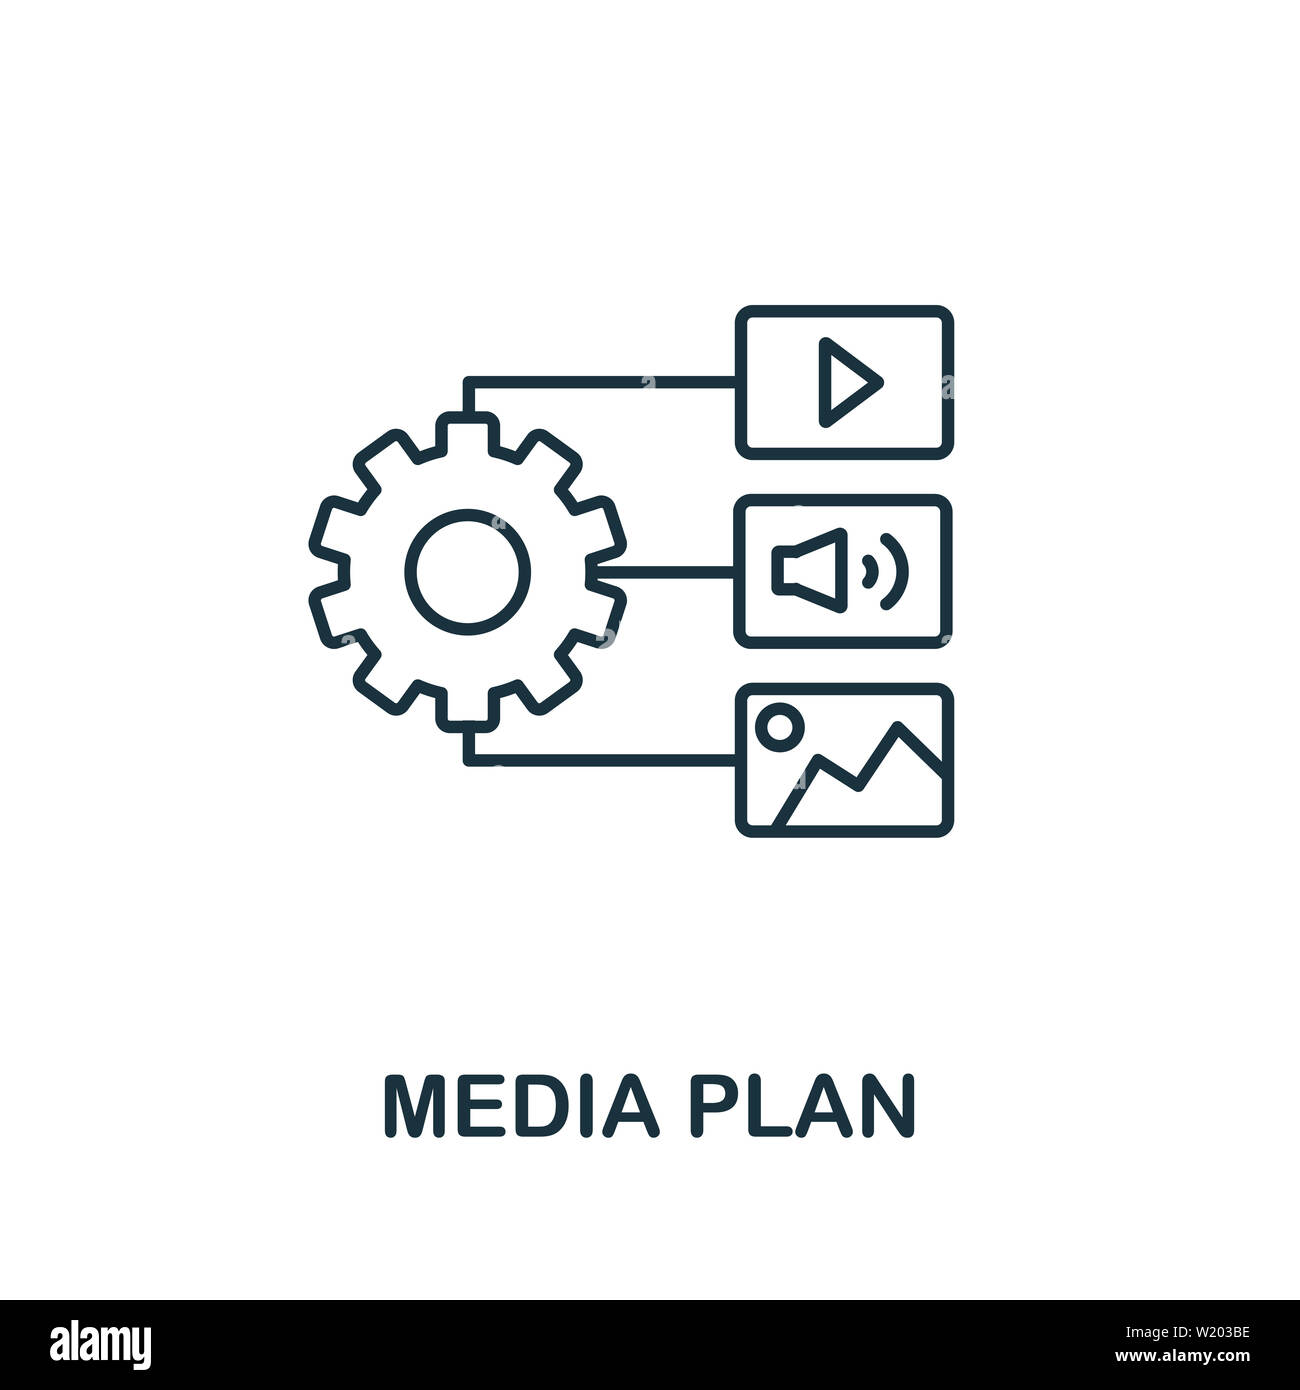 Media Plan outline icon. Thin line concept element from content icons collection. Creative Media Plan icon for mobile apps and web usage Stock Photo